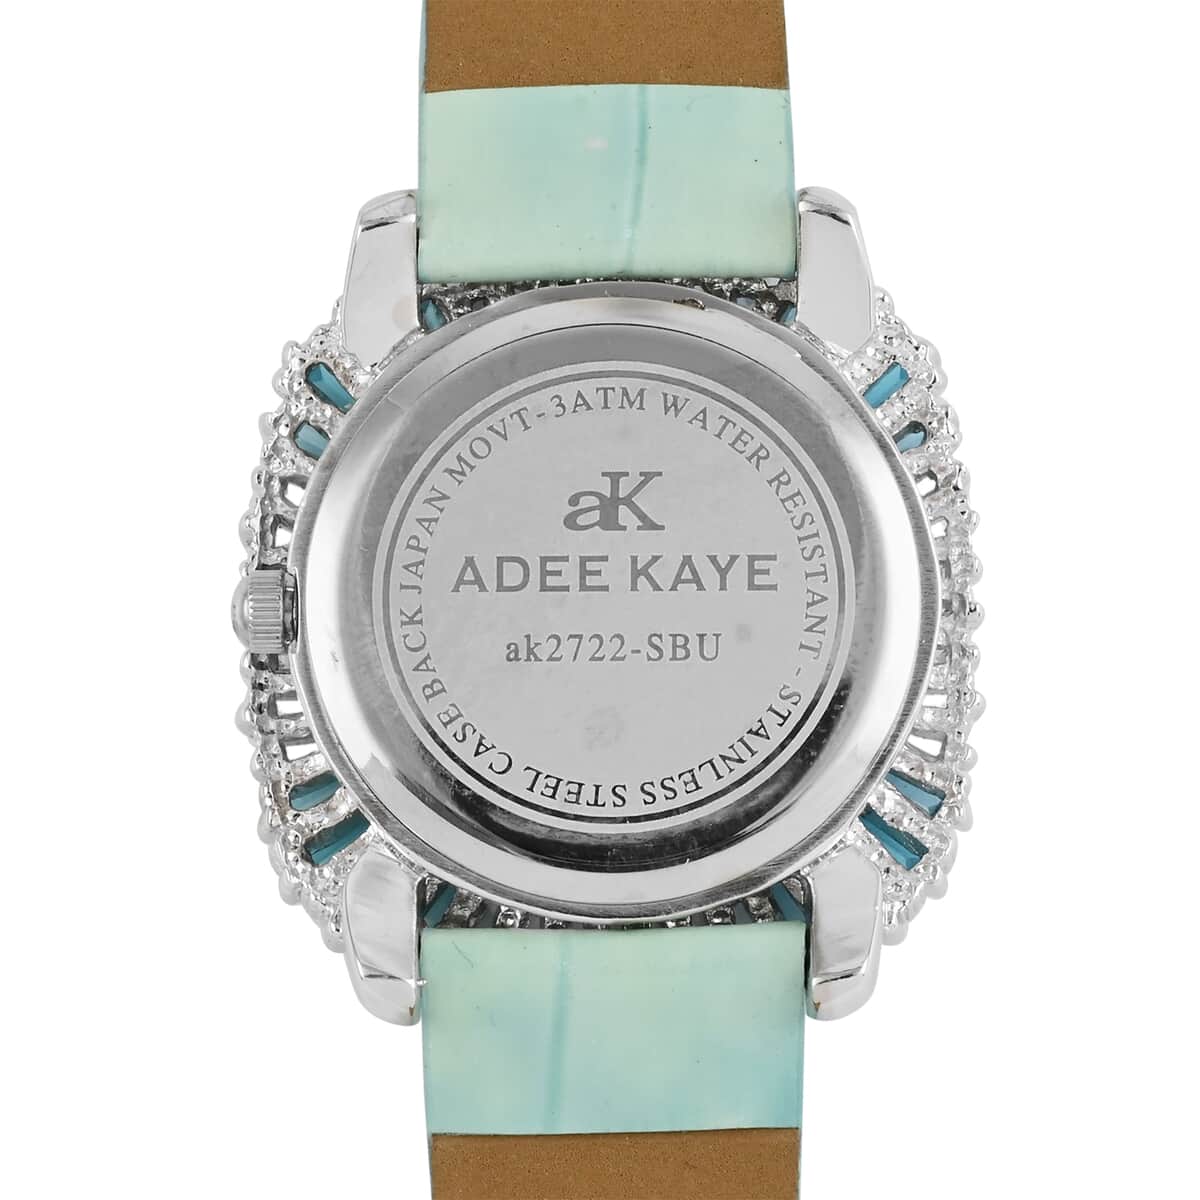 ADEE KAYE Austrian Crystal Japan Quartz Movement MOP Dial Watch in Blue Leather Band (36 mm) | Designer Leather Watch | Analog Luxury Wristwatch image number 4